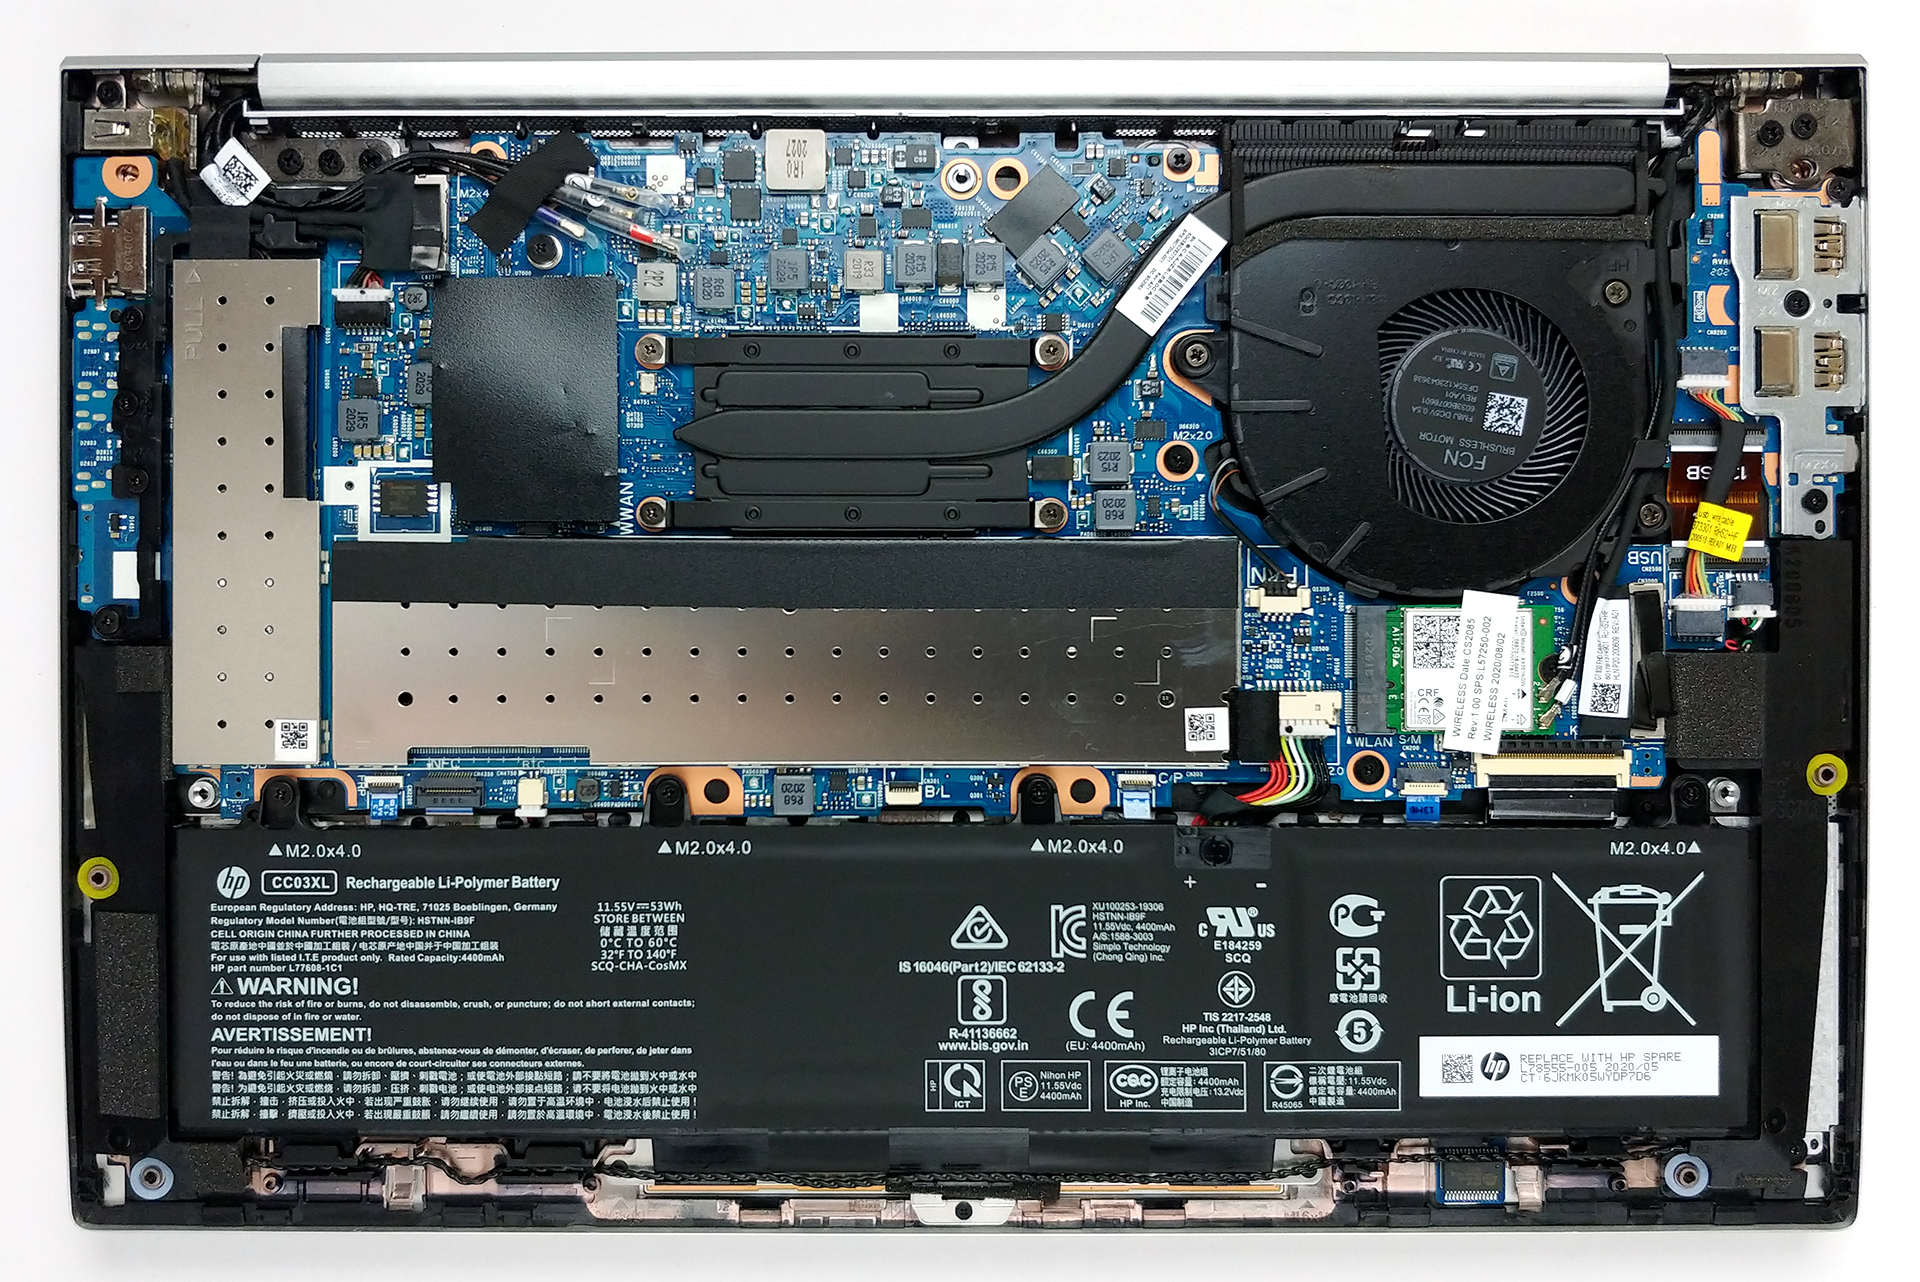 Inside HP EliteBook 830 G7 - disassembly and upgrade options